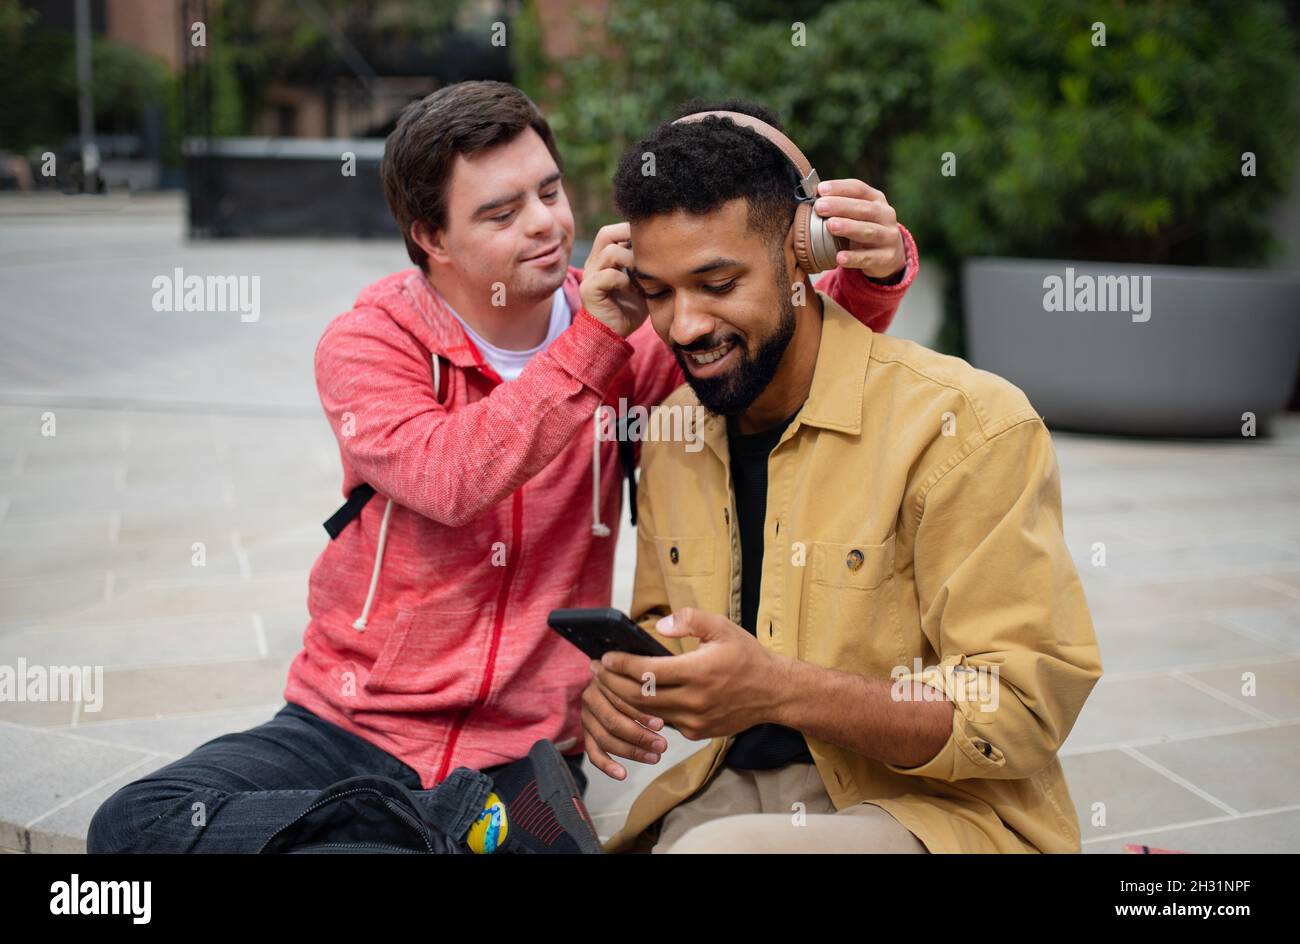 Young man with Down syndrome with his mentoring friend sitting outdoors and listening to music. Stock Photo